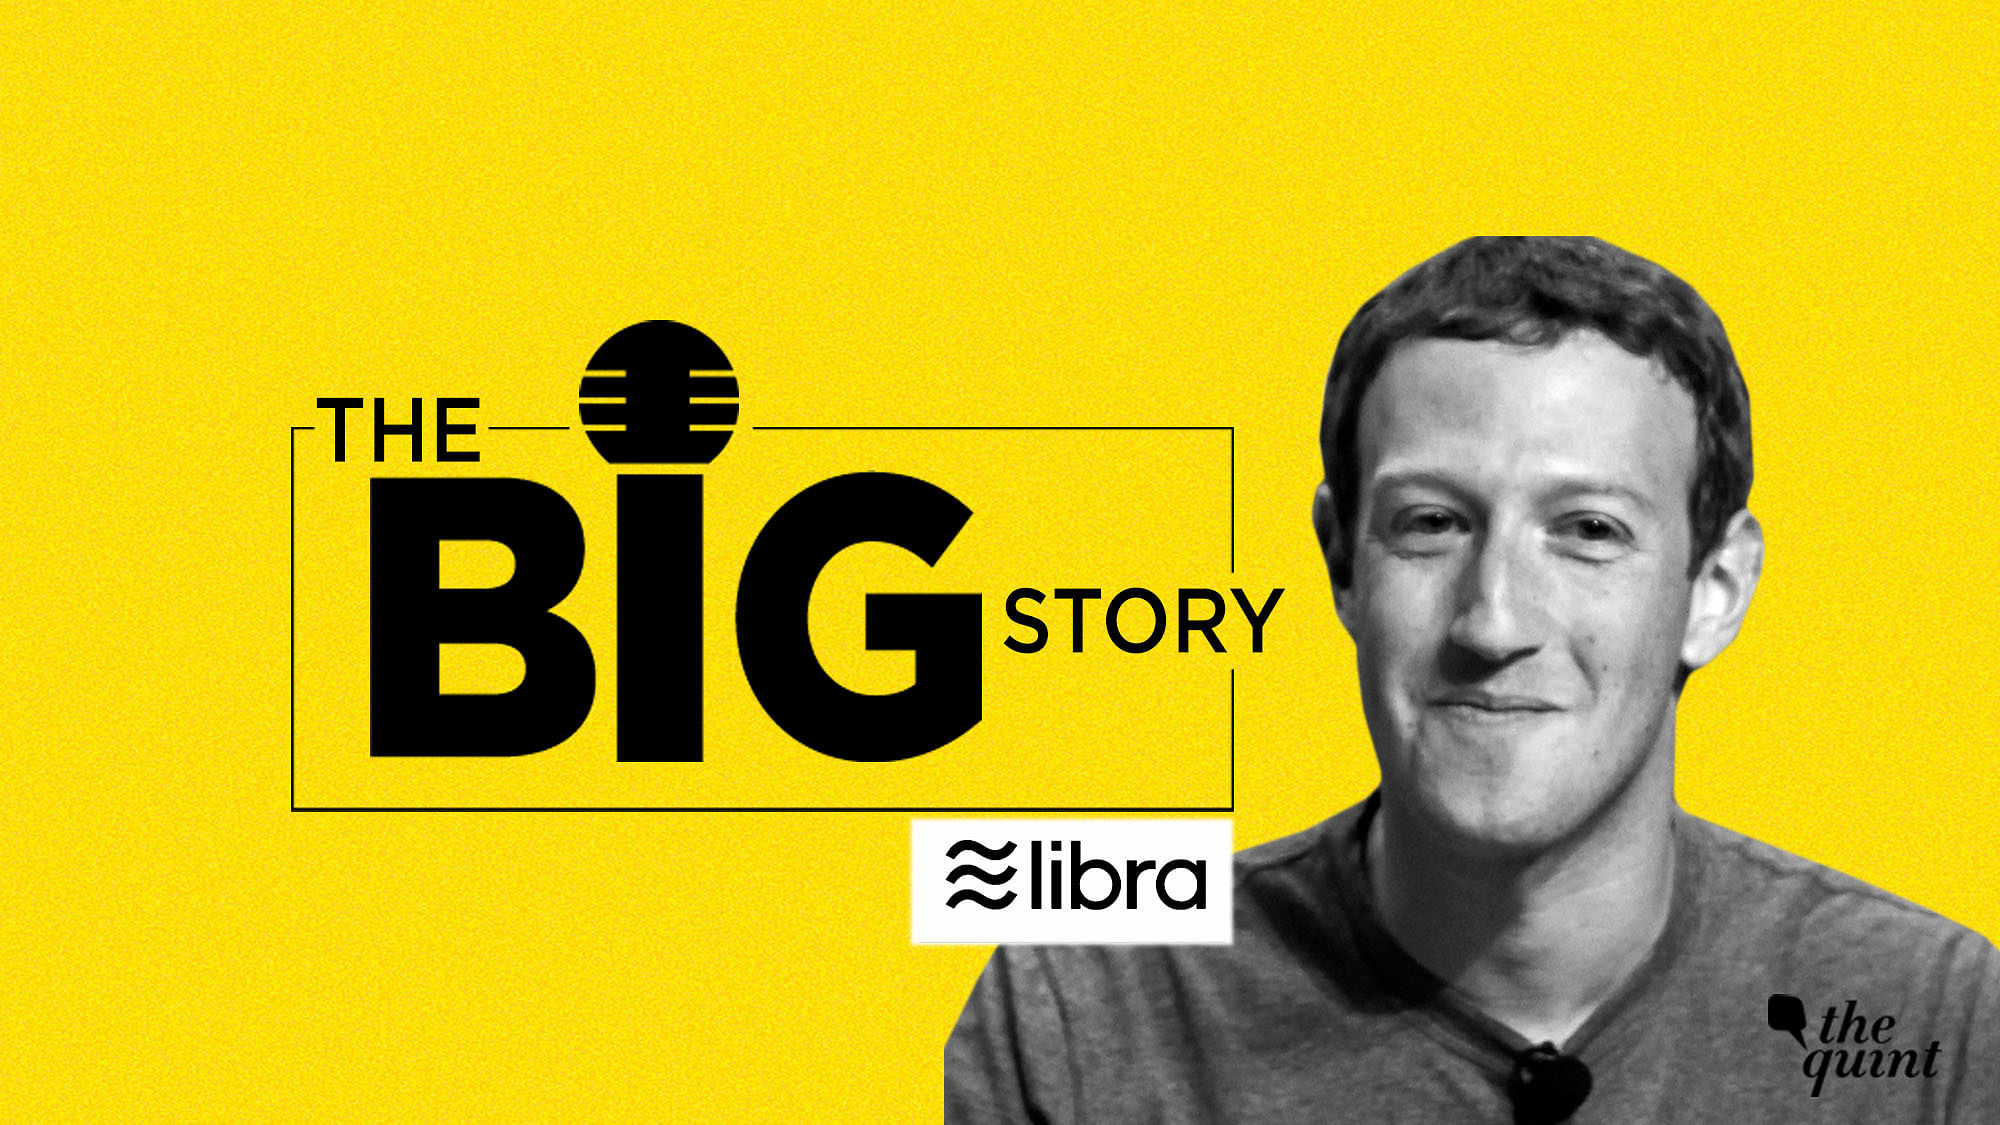 Facebook’s cryptocurrency, Libra, will be launched in 2020.&nbsp;